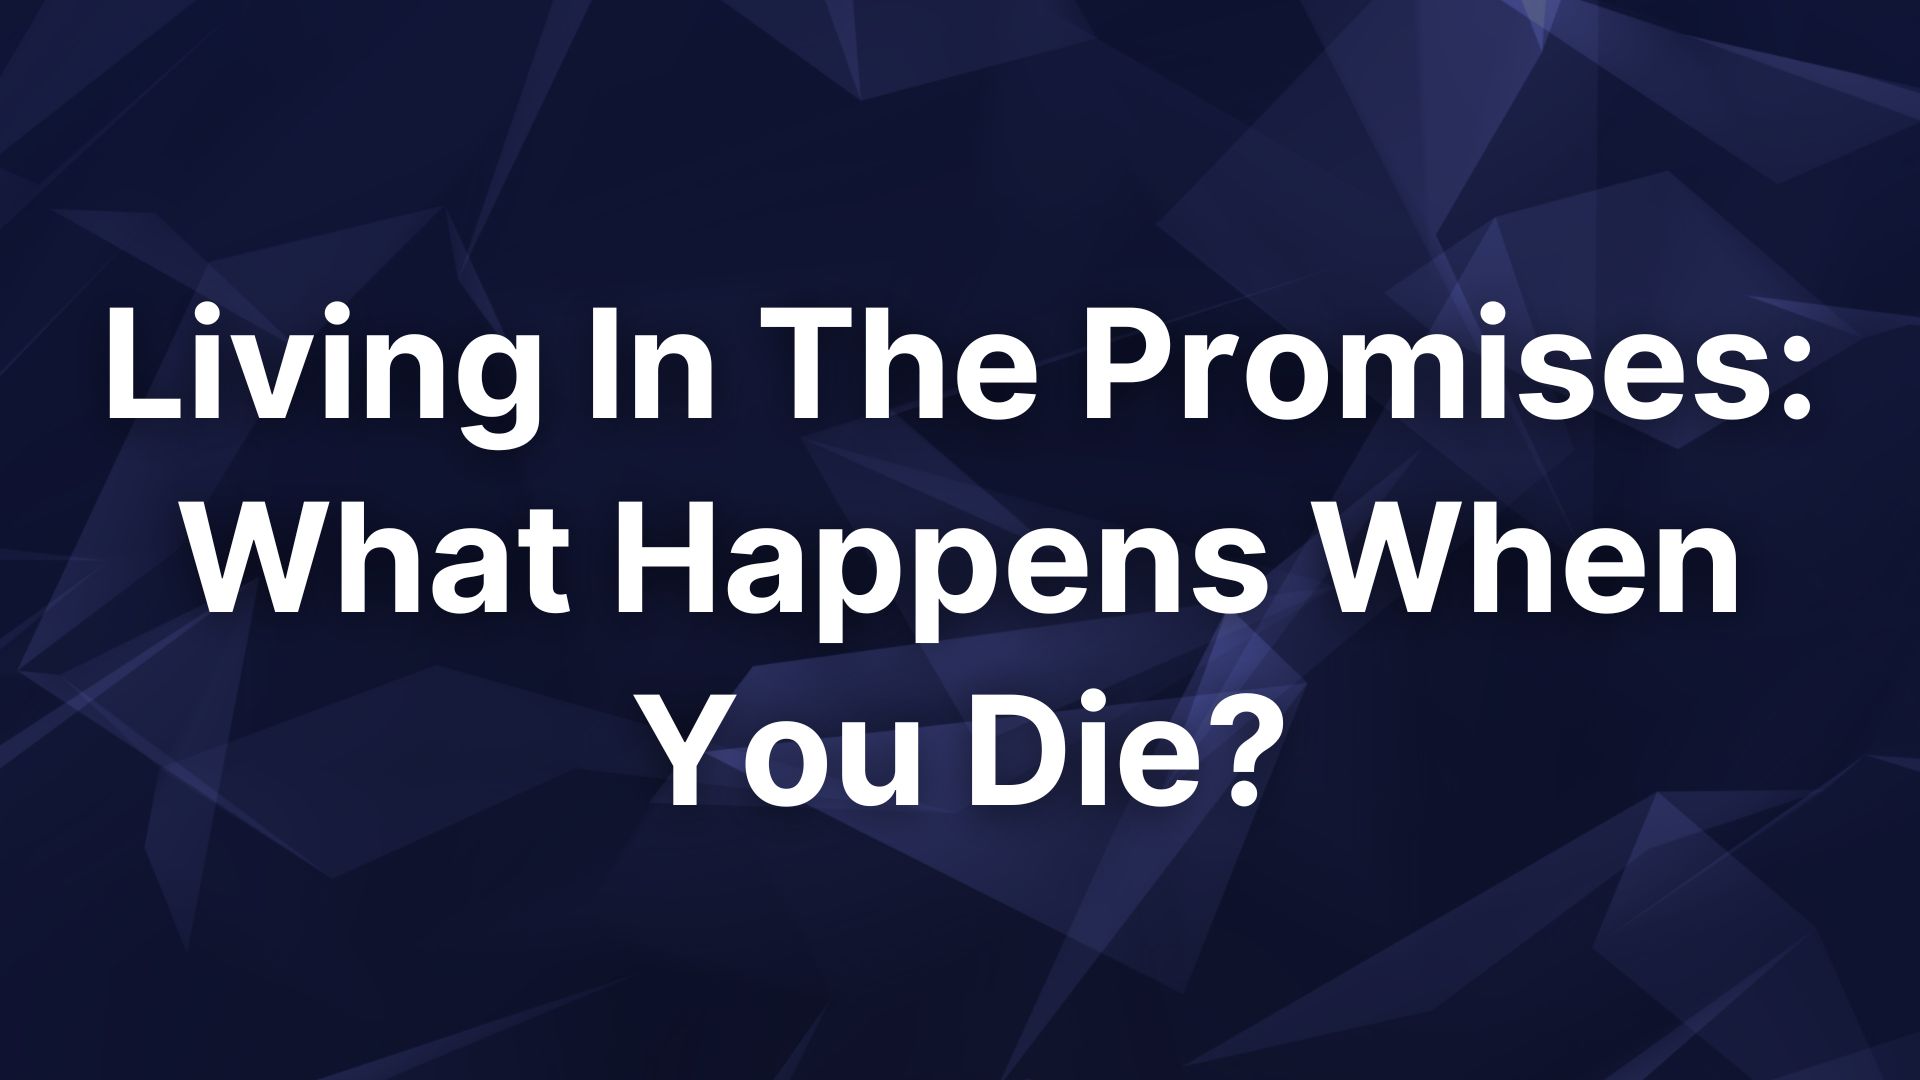 Living In The Promises: What Happens When You Die?